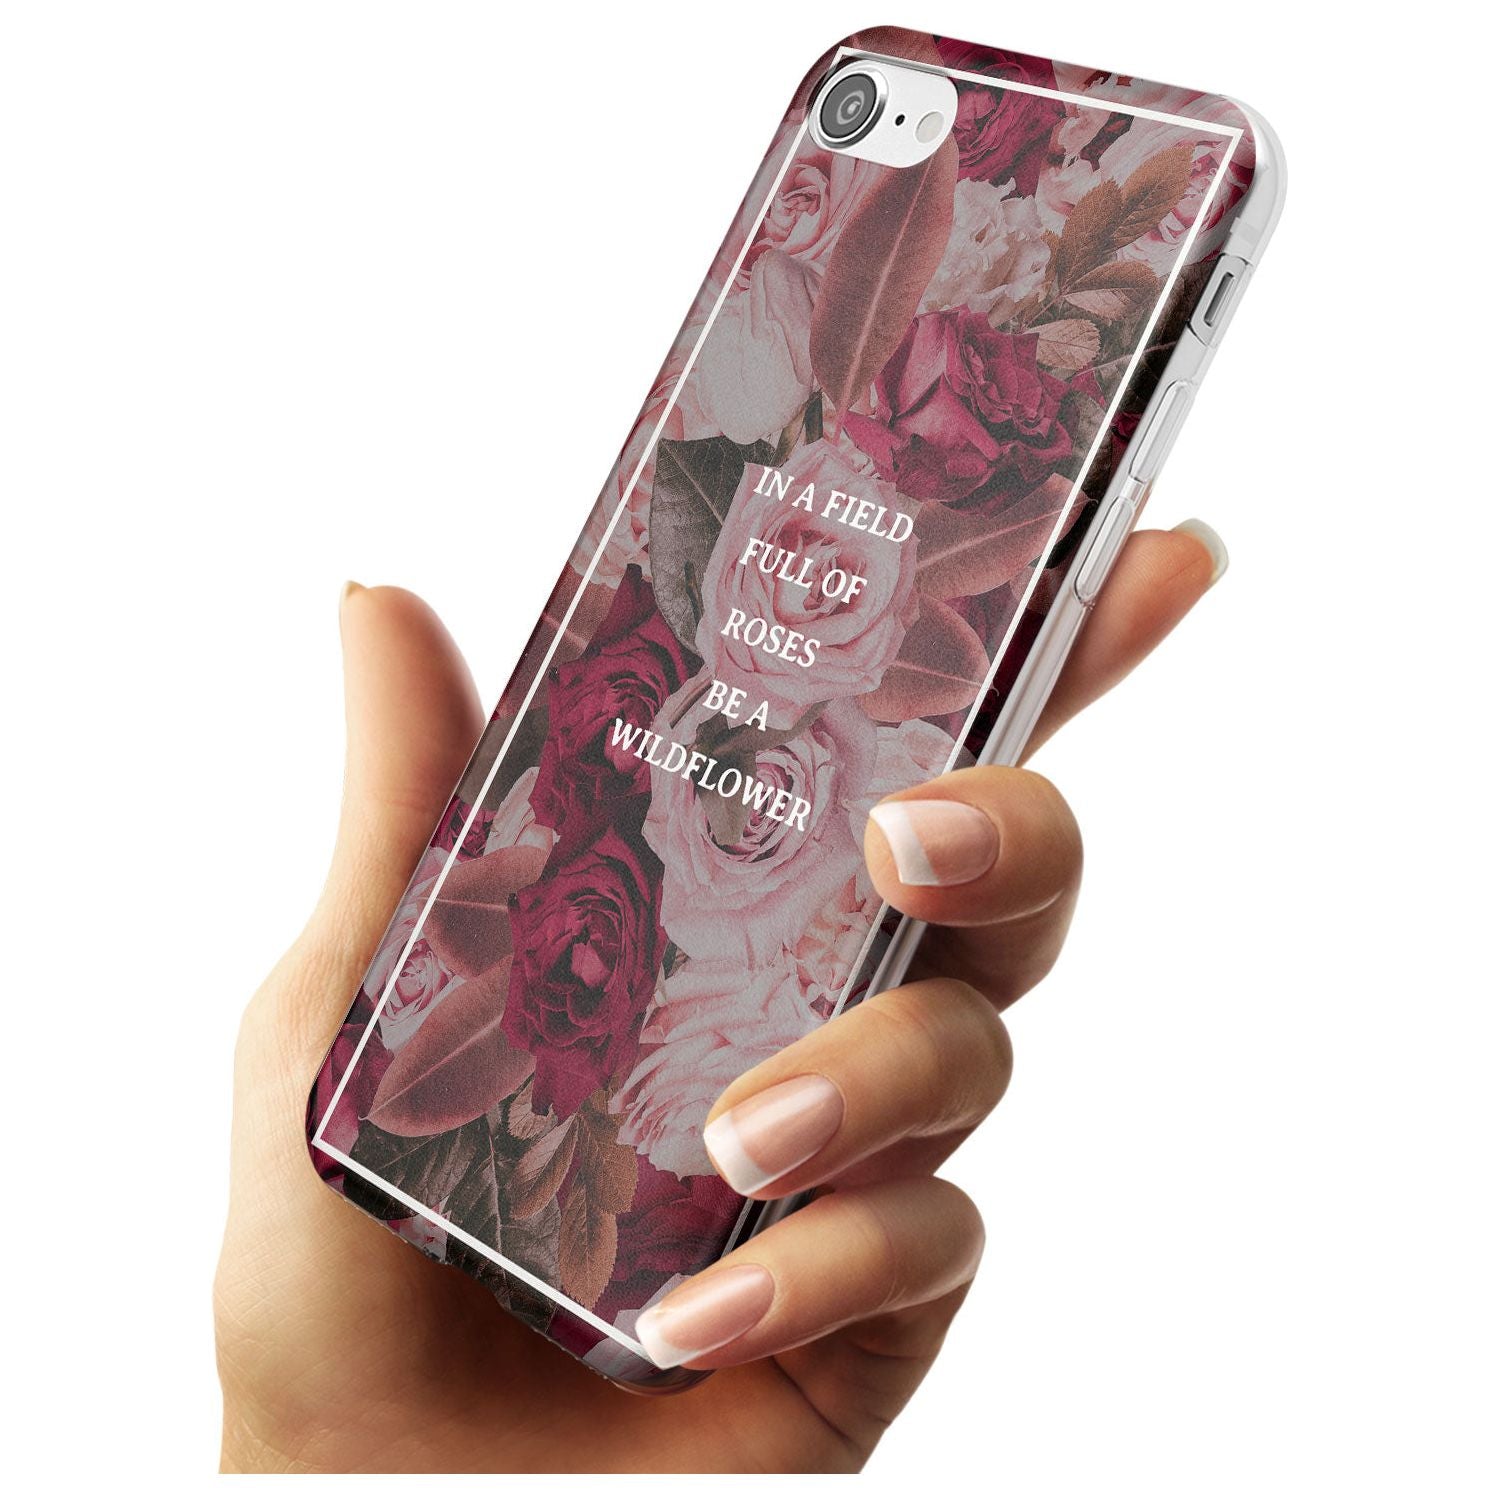 Be a Wildflower Floral Quote Slim TPU Phone Case for iPhone SE 8 7 Plus